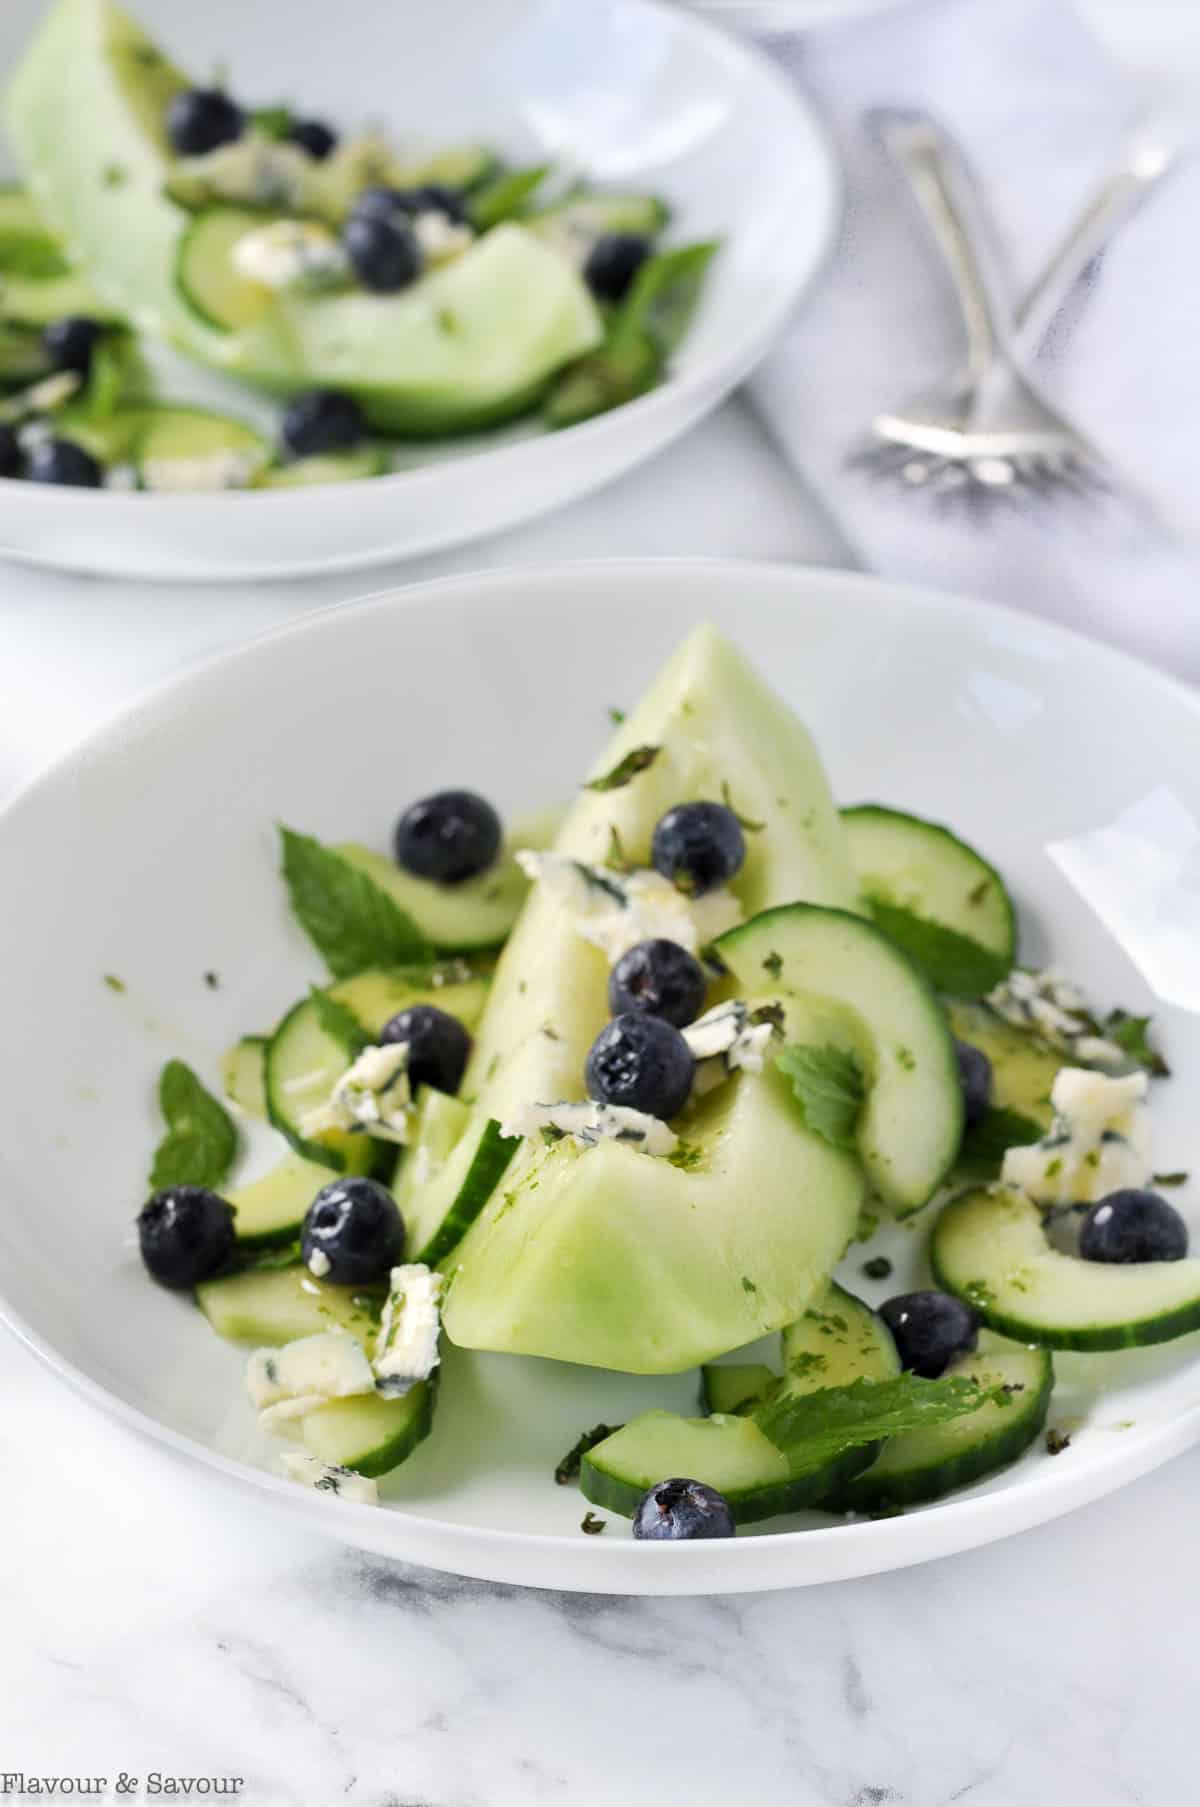 A close up view of Honeydew Melon Salad with blueberries, blue cheese and mint leaves